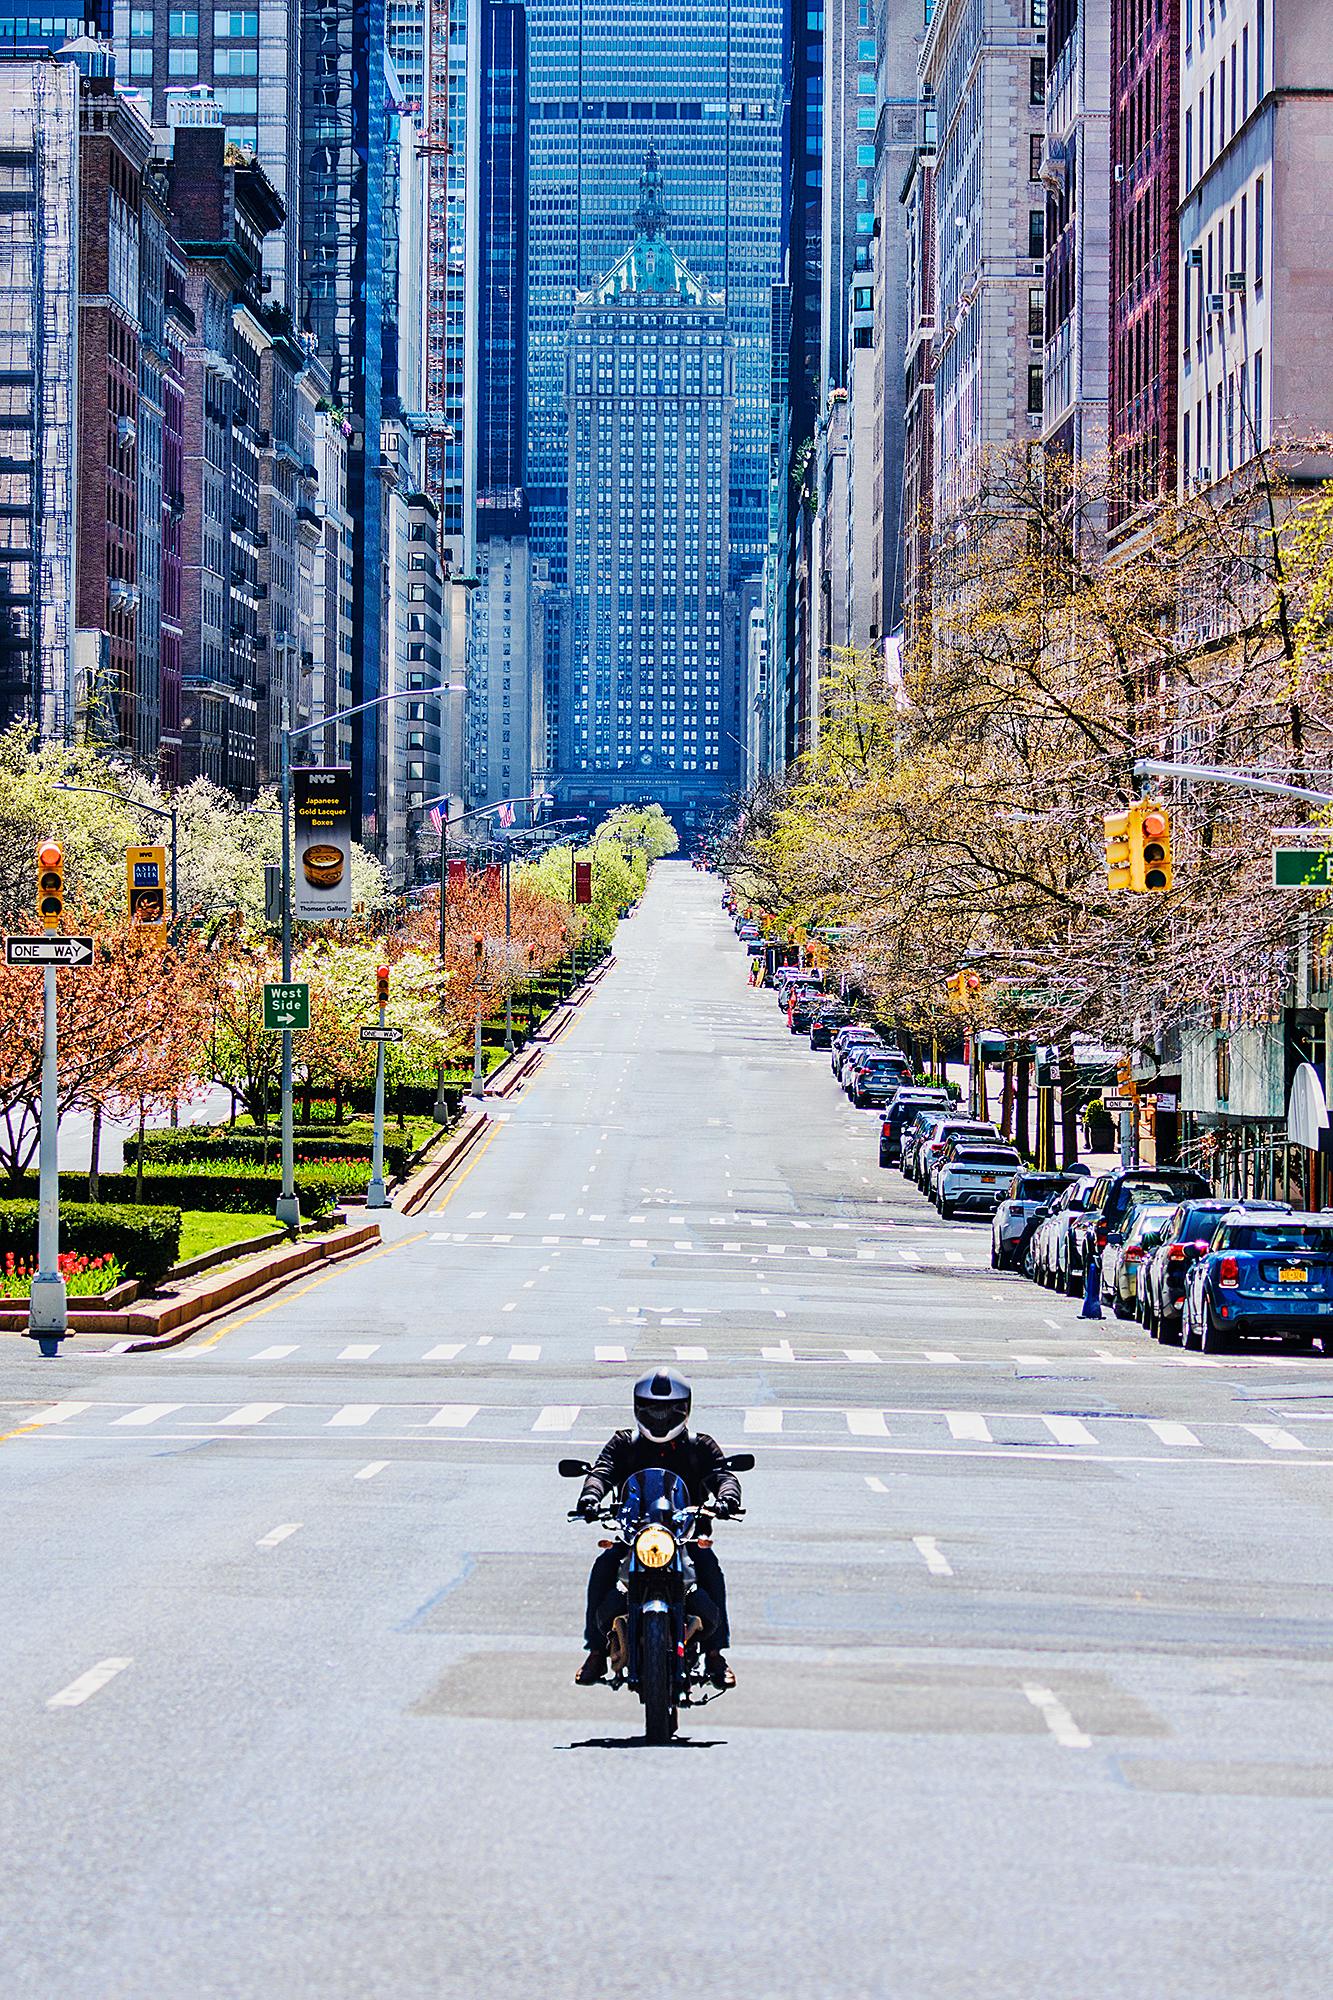 Covid-19 New York City, Empty Park Avenue no Traffic Except a Lone Motorcycle